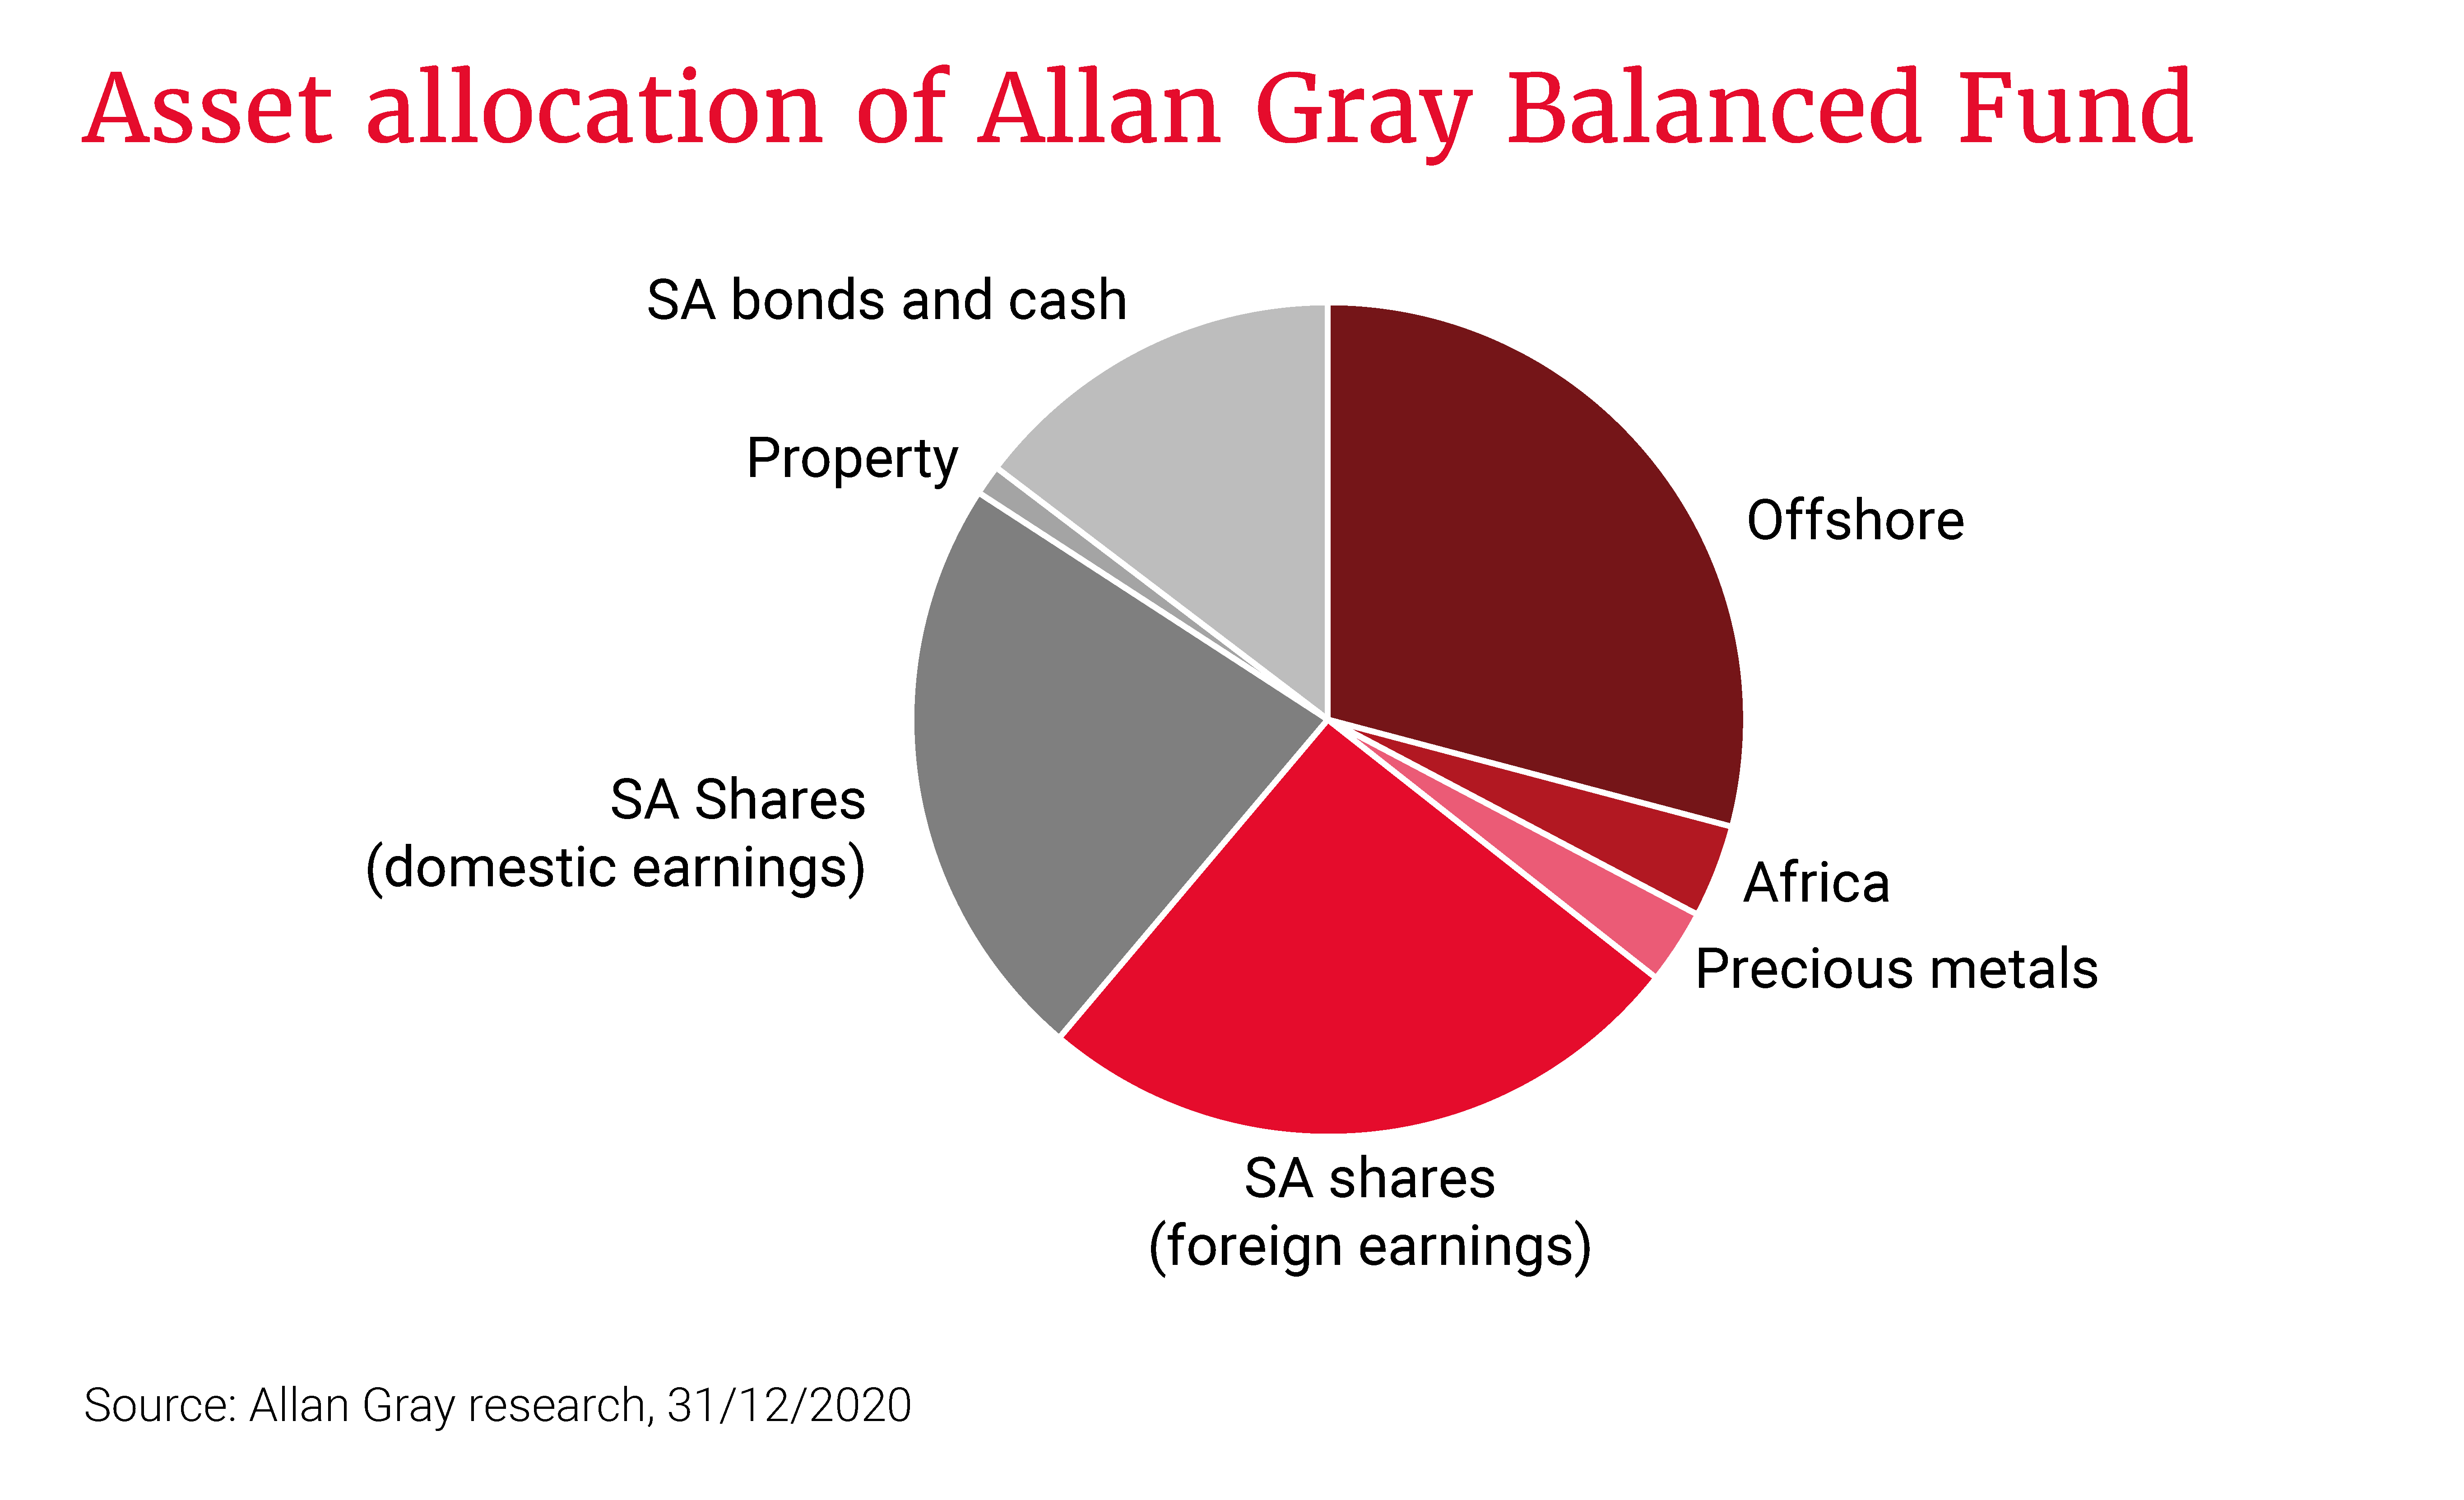 Asset allocation of the Allan Gray Balanced Fund